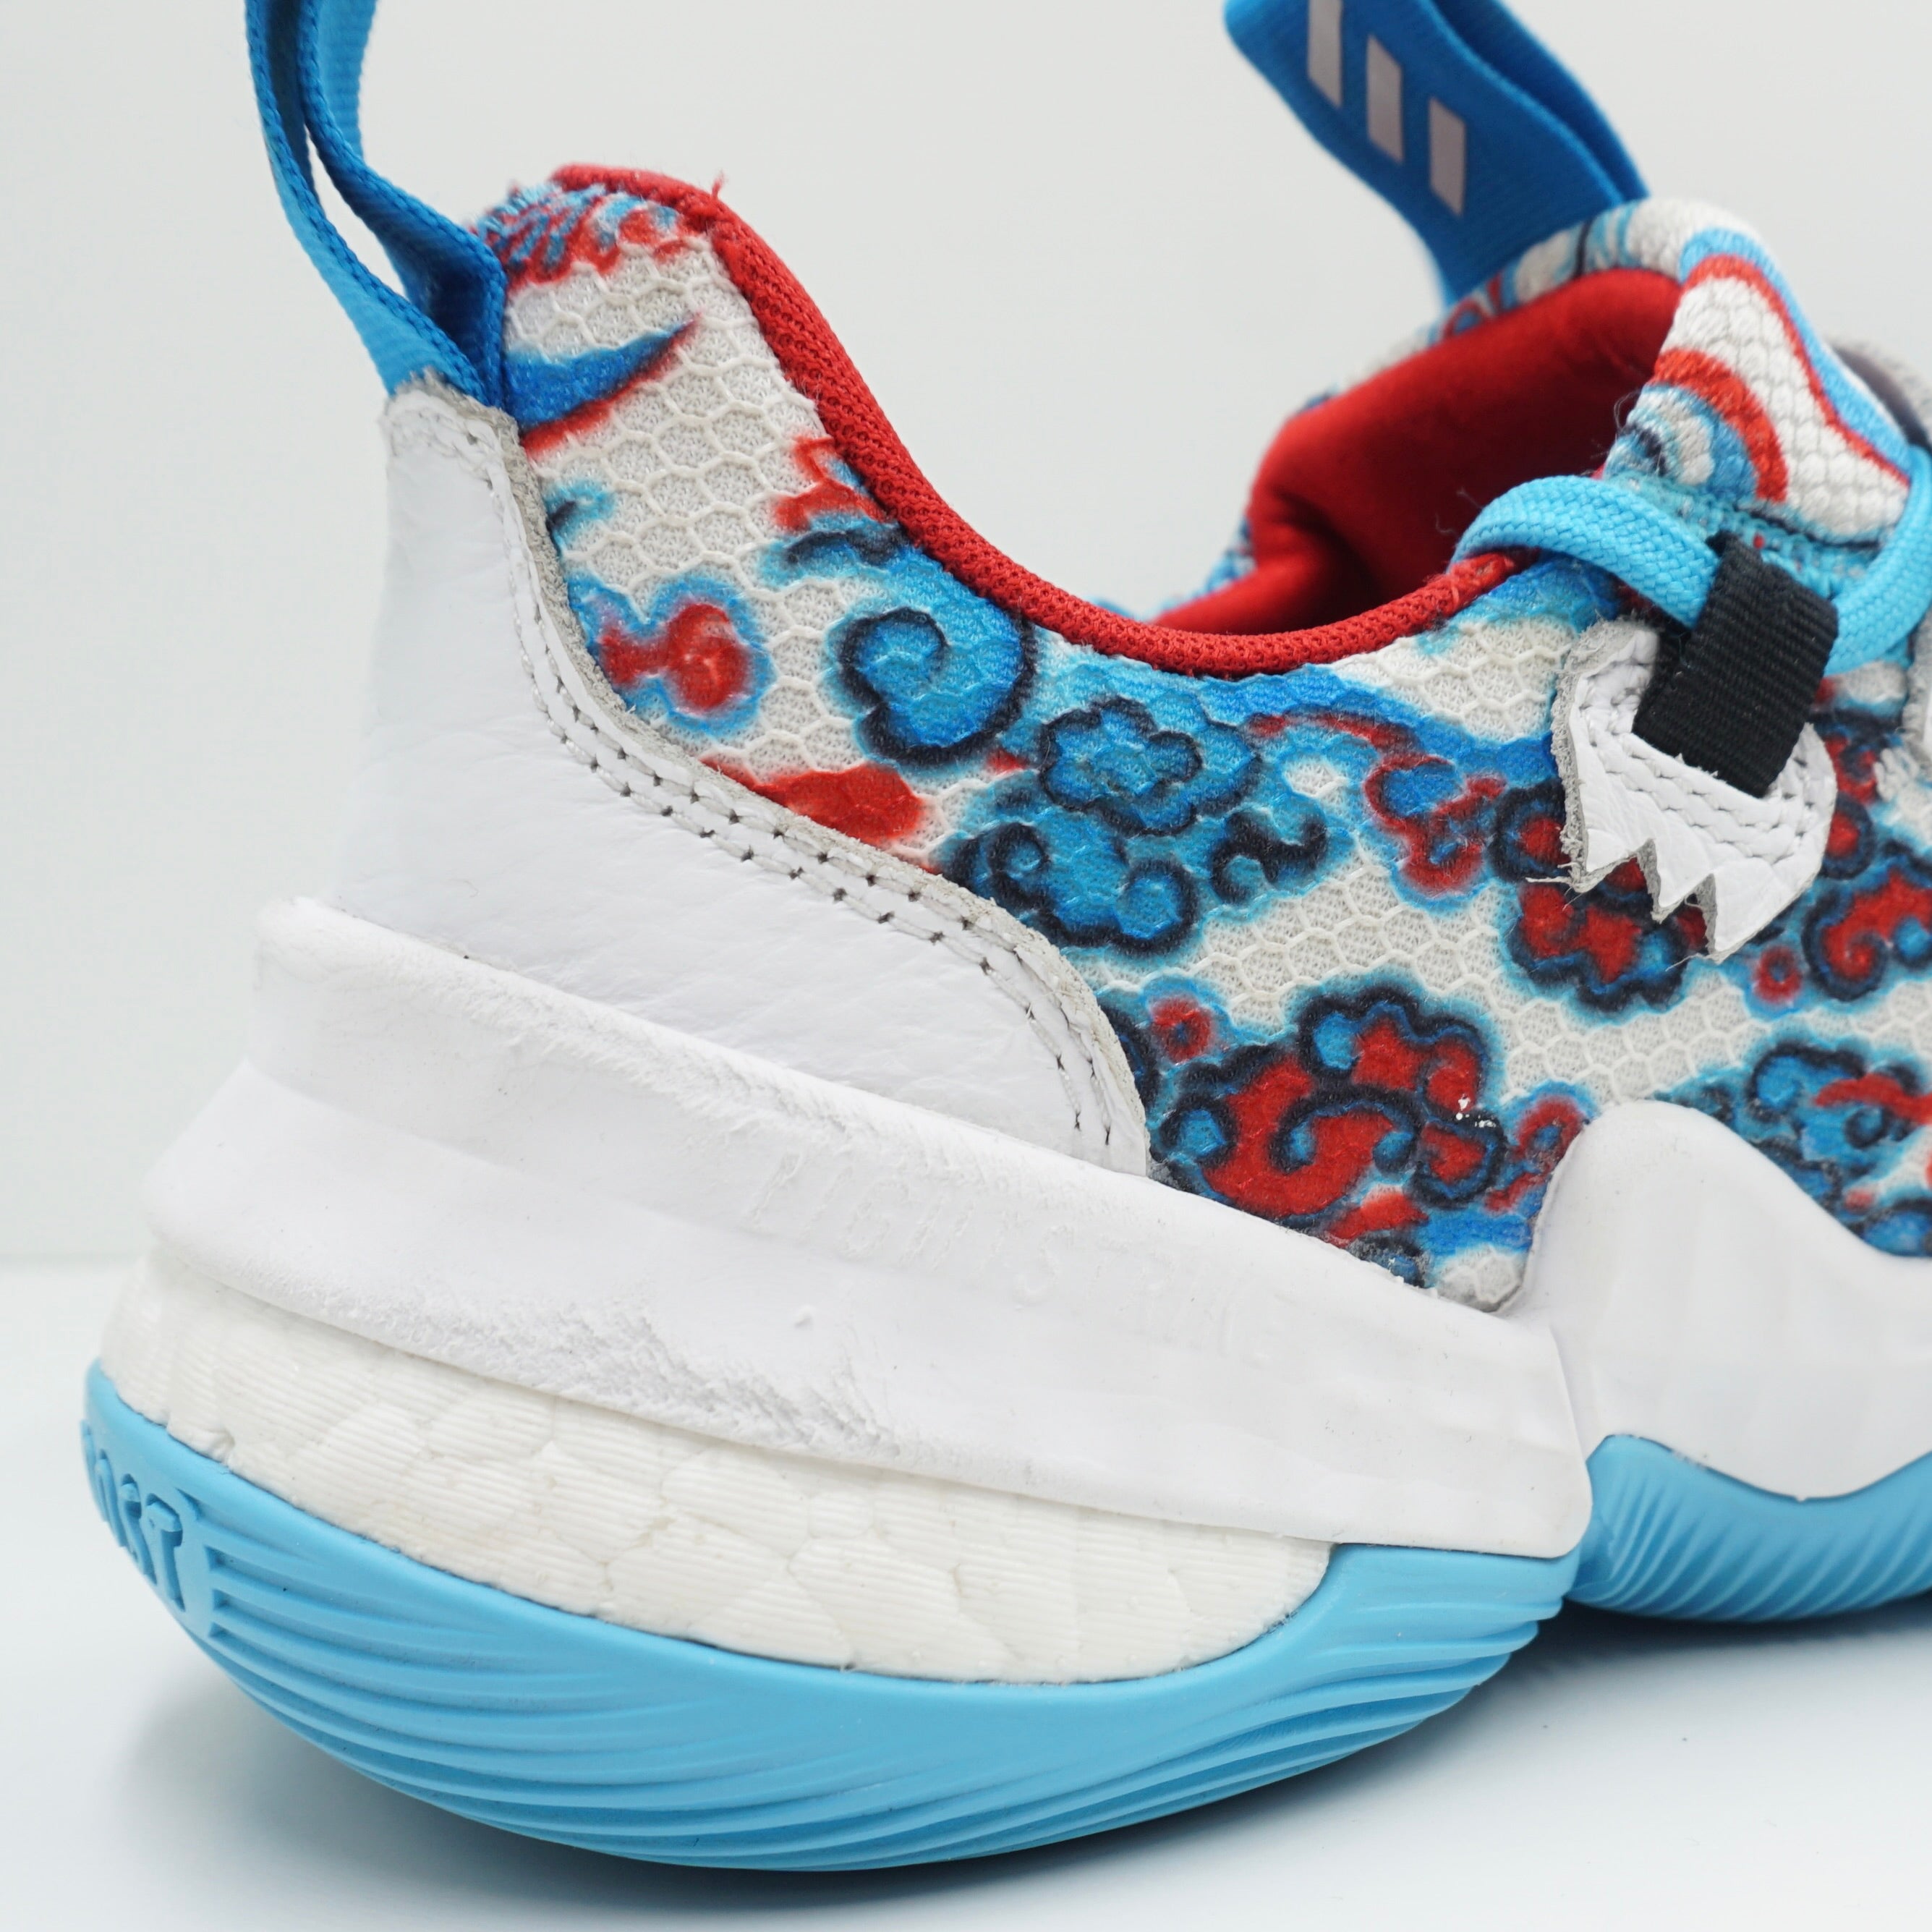 Adidas Trae Young 1 Chinese New Year